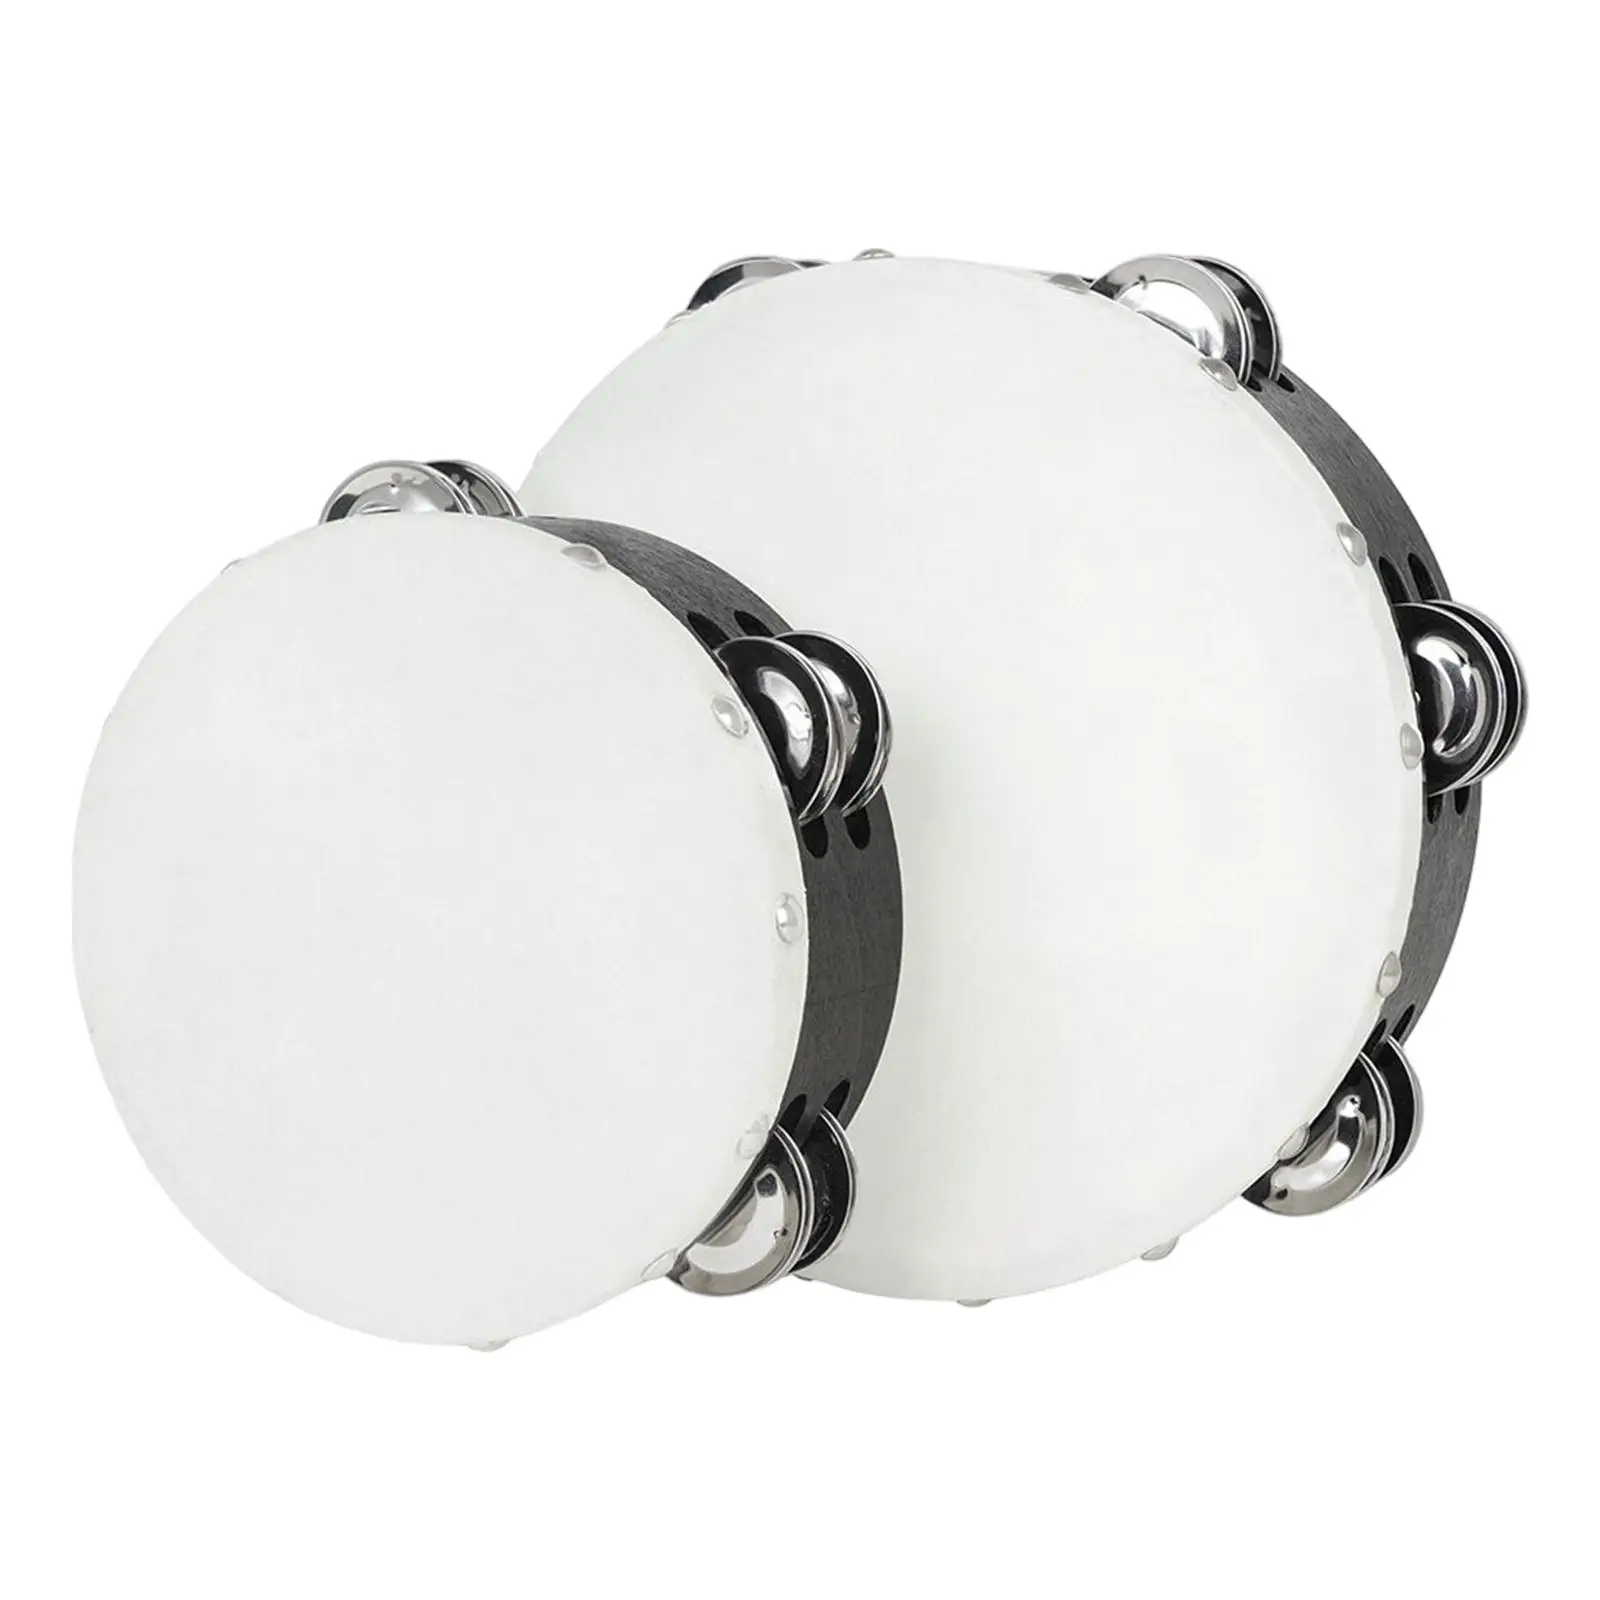 2Pcs Wooden Handheld Tambourines, 8inches 6inches Double Rows Tambourine, Drum Instrument for Adults, Kids, Party and Games